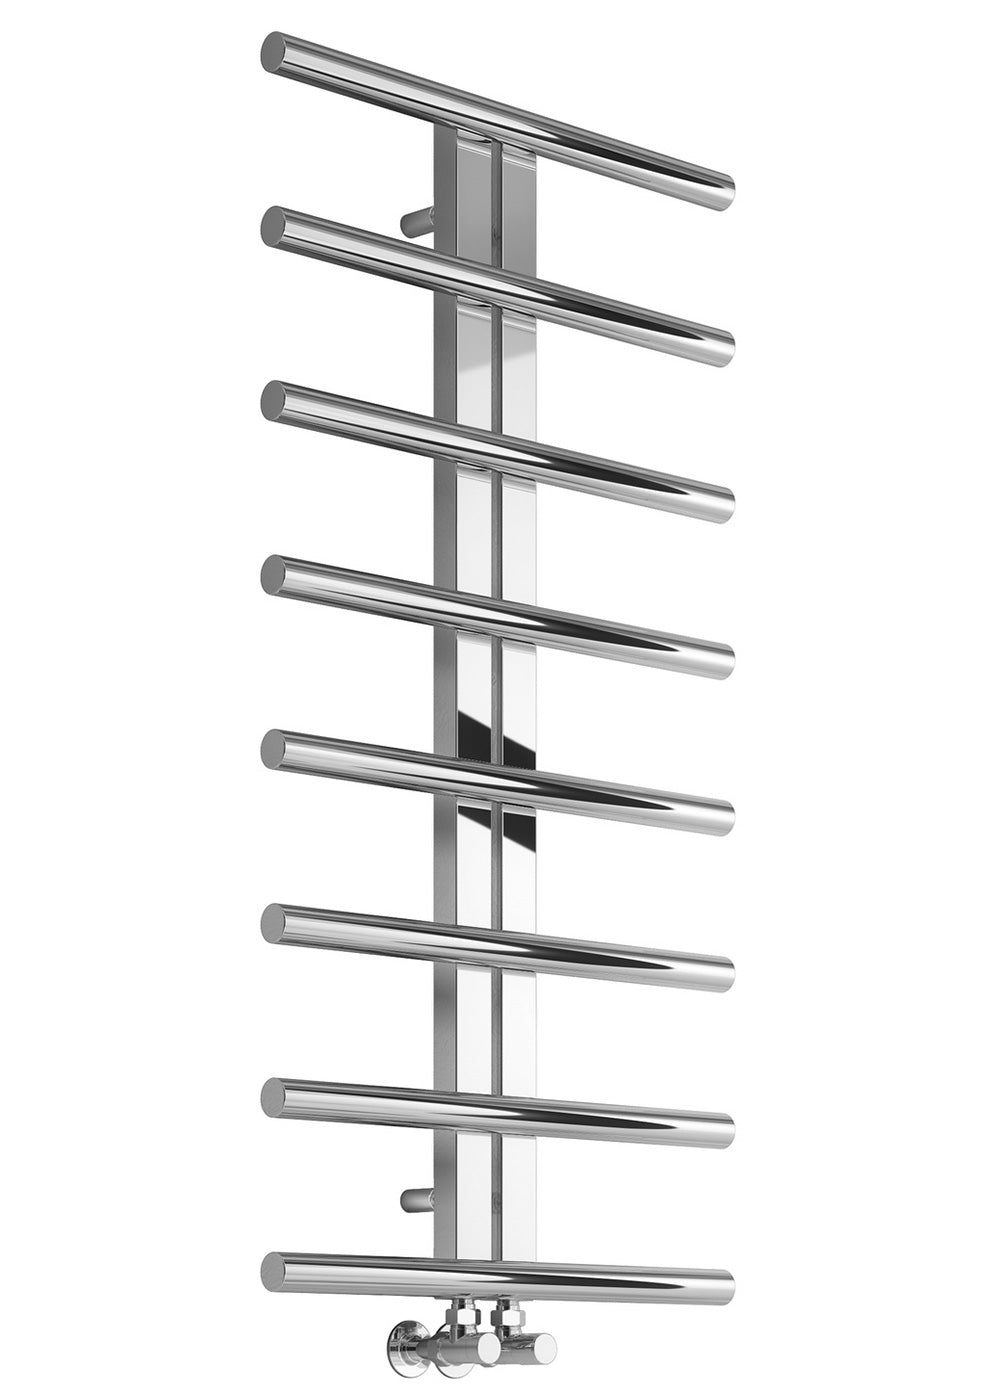 Pizzo Stainless Steel Heated Towel Rail - 1000mm x 600mm - Polished Stainless Steel